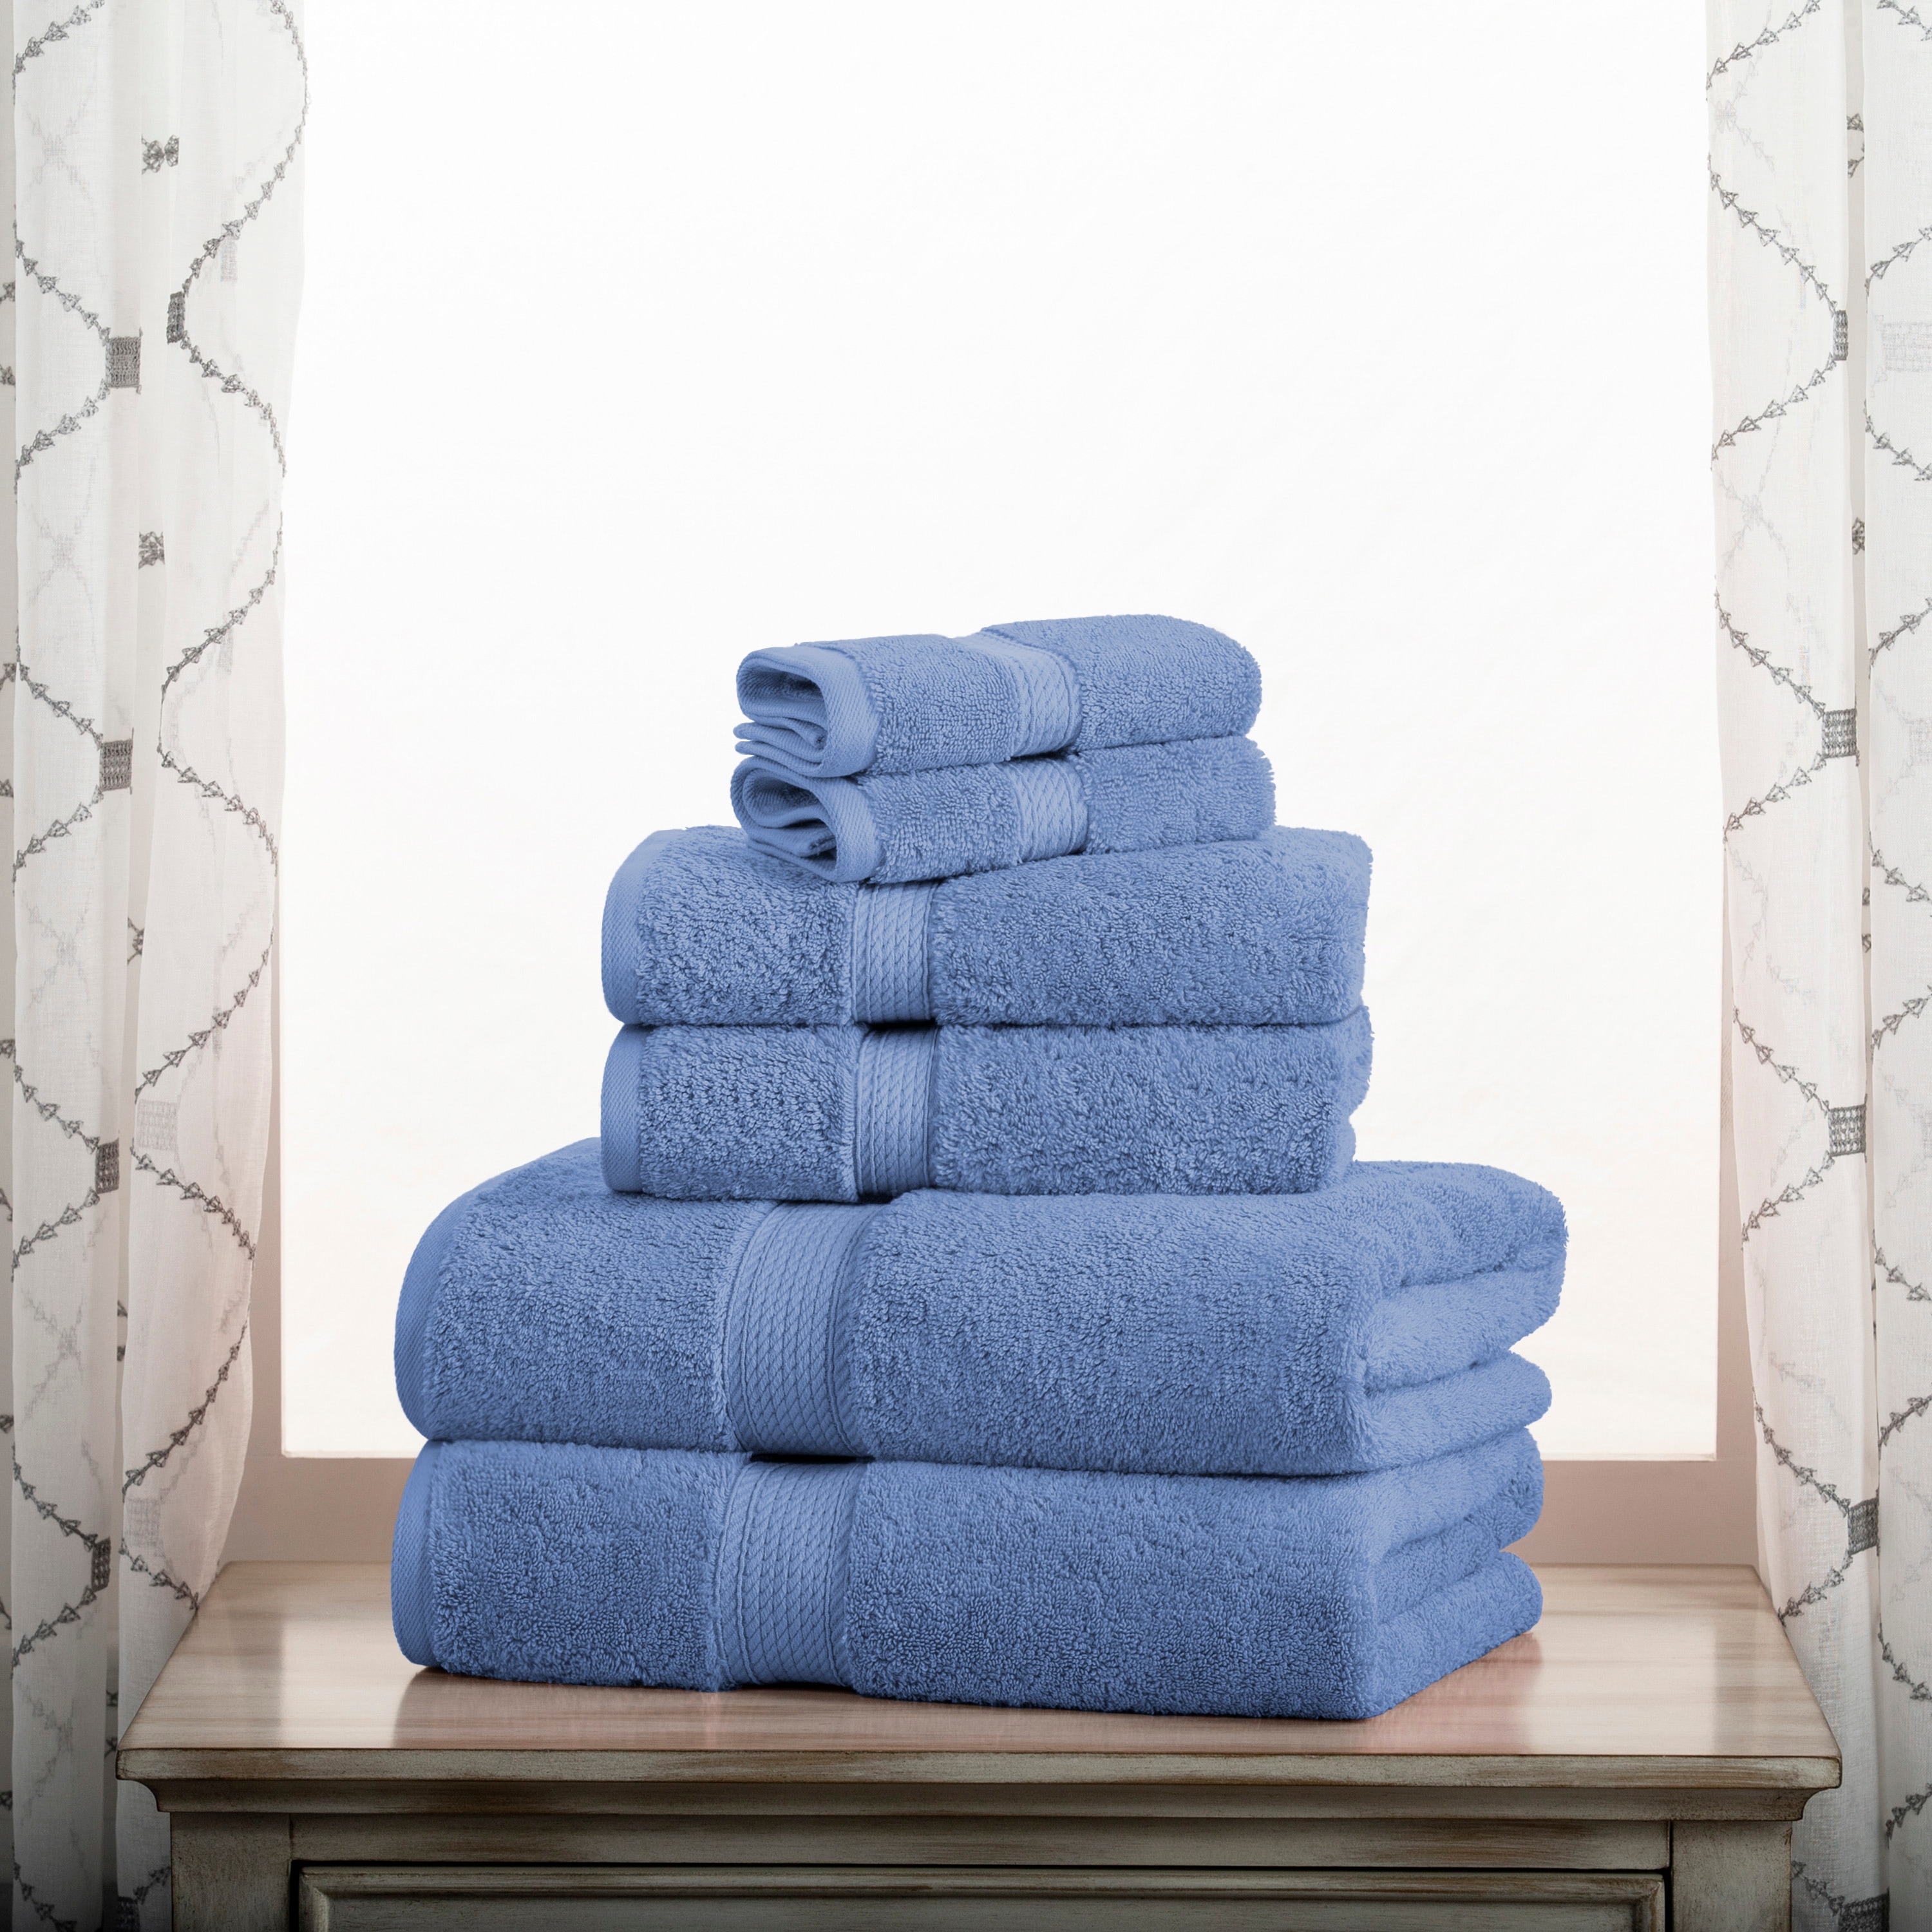 https://ak1.ostkcdn.com/images/products/is/images/direct/59e9599e5b943c4d9d14e2fe5109ae0b86a741e7/Egyptian-Cotton-Heavyweight-Solid-Plush-Towel-Set-by-Superior.jpg